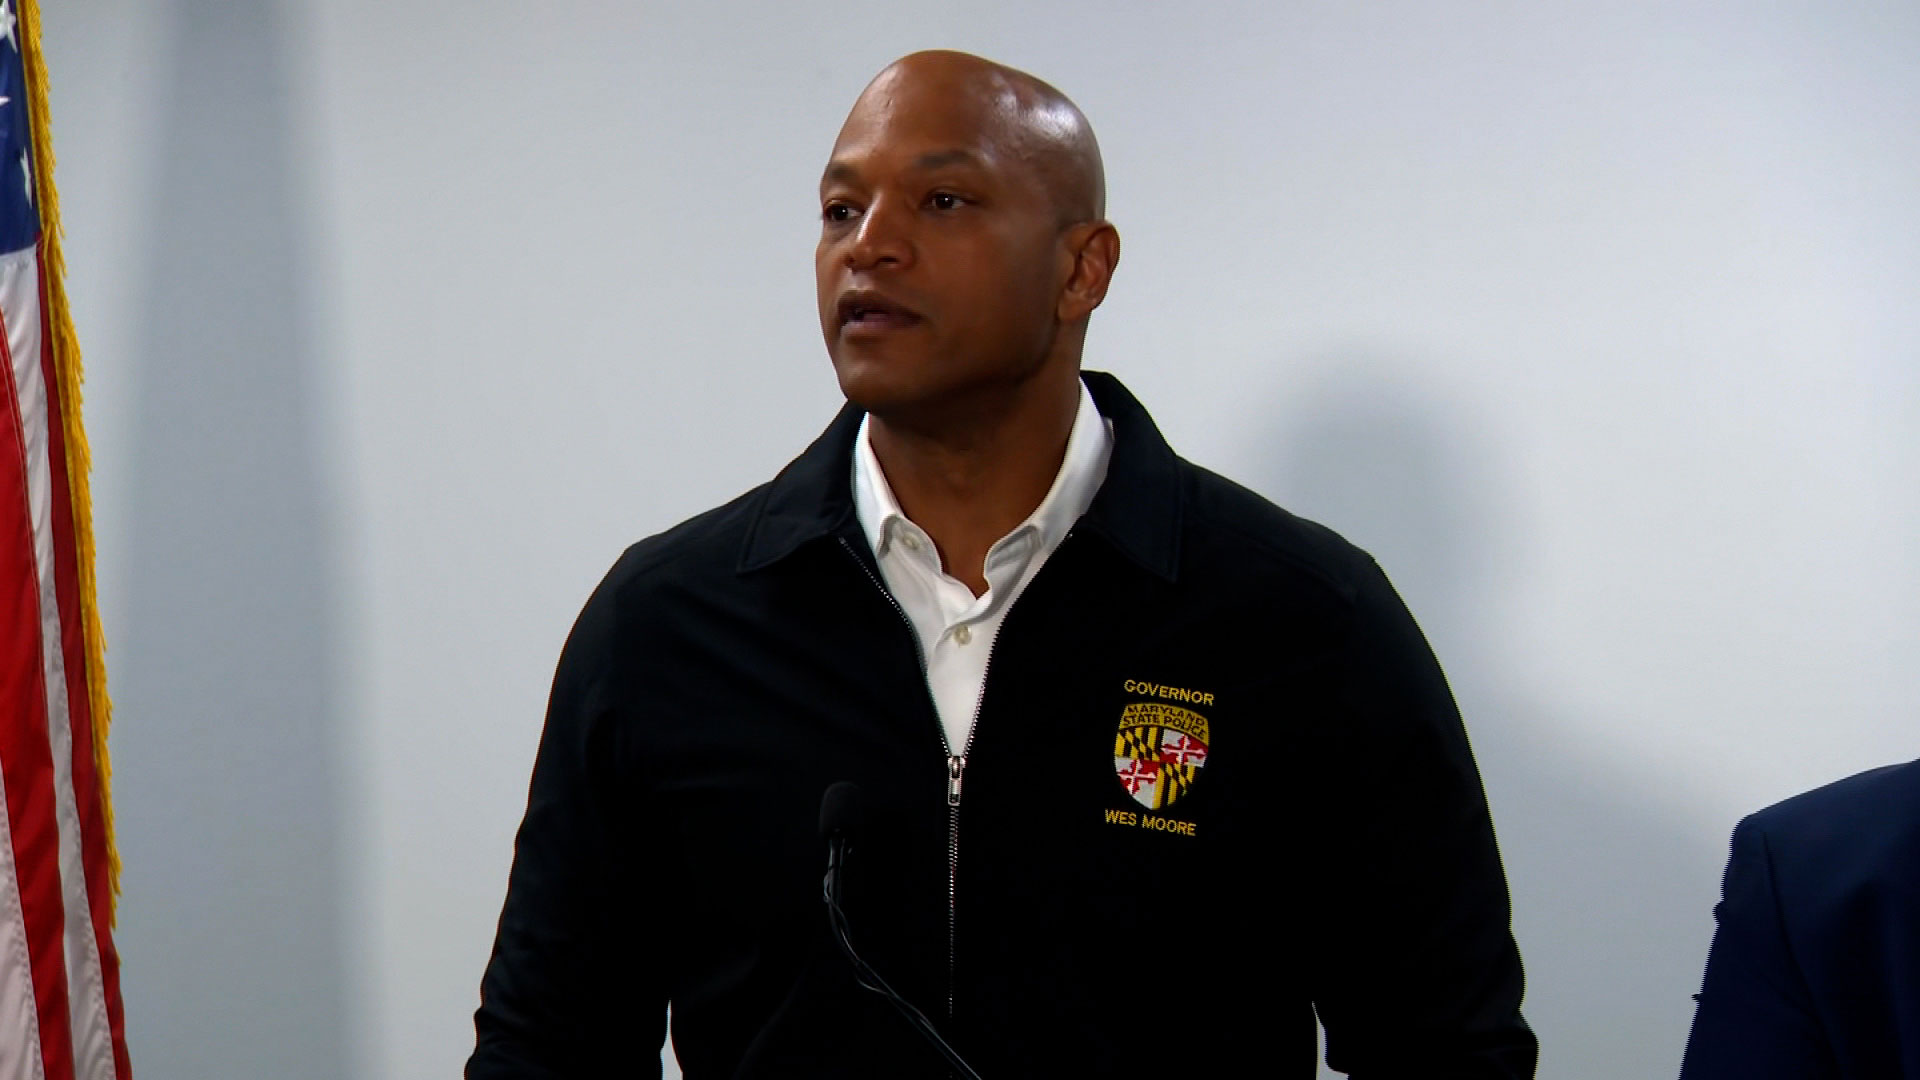 Maryland Gov. Wes Moore speaks at a press conference on Thursday.